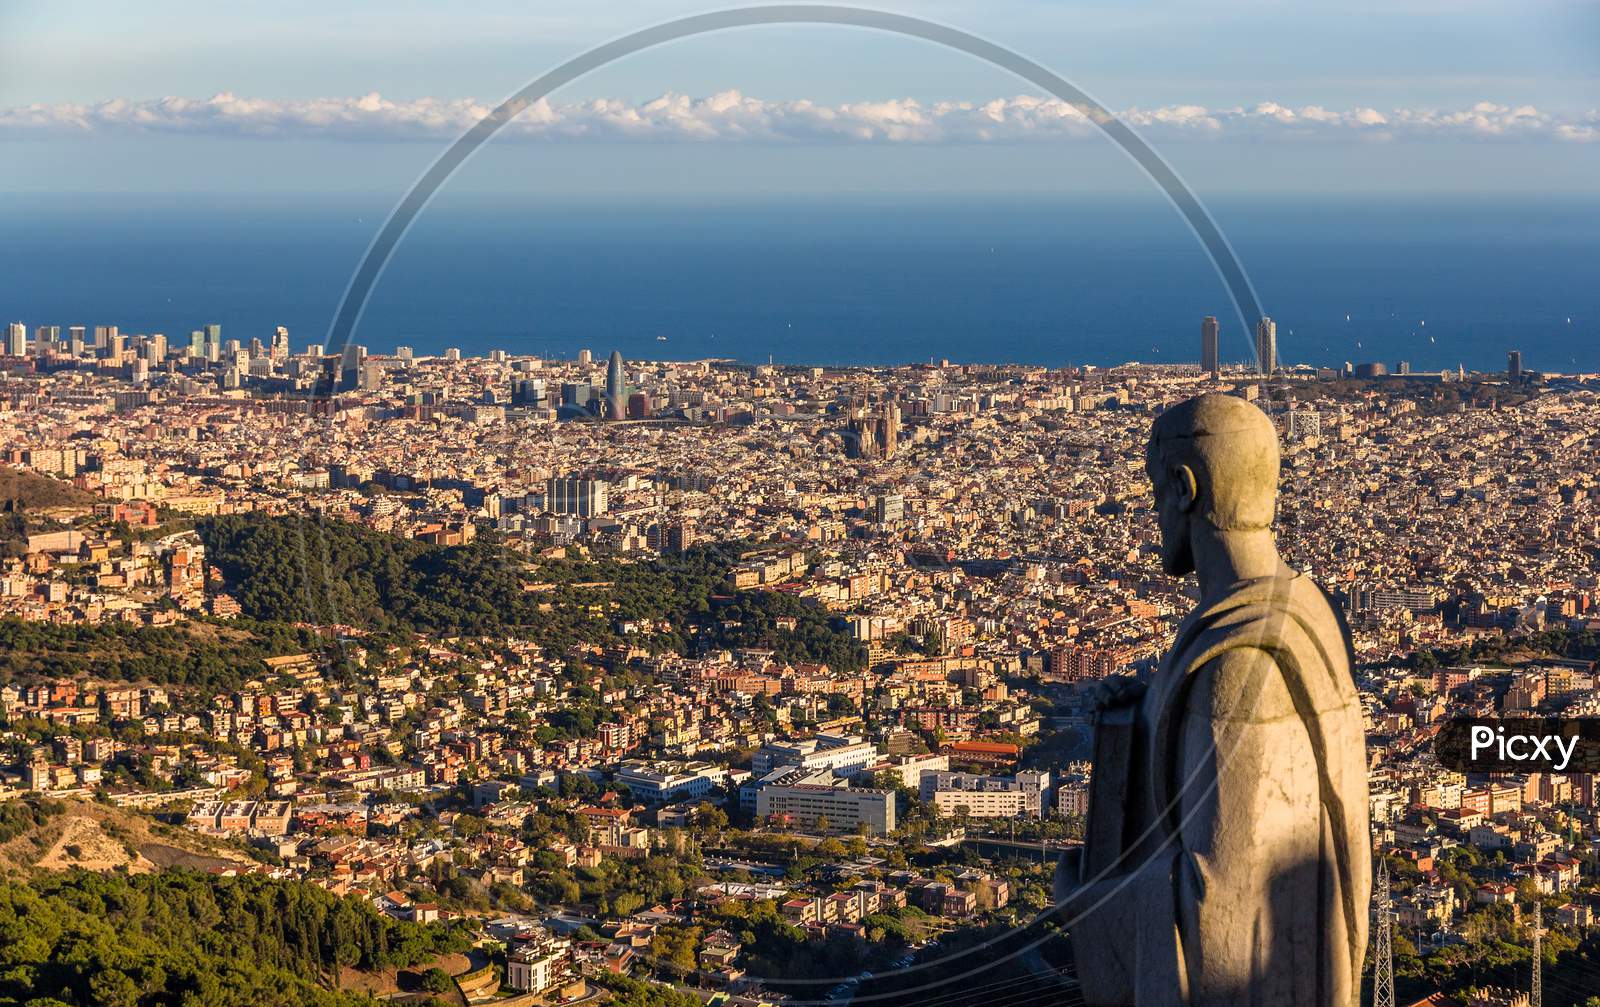 Sculpture Of Apostle And View Of Barcelona